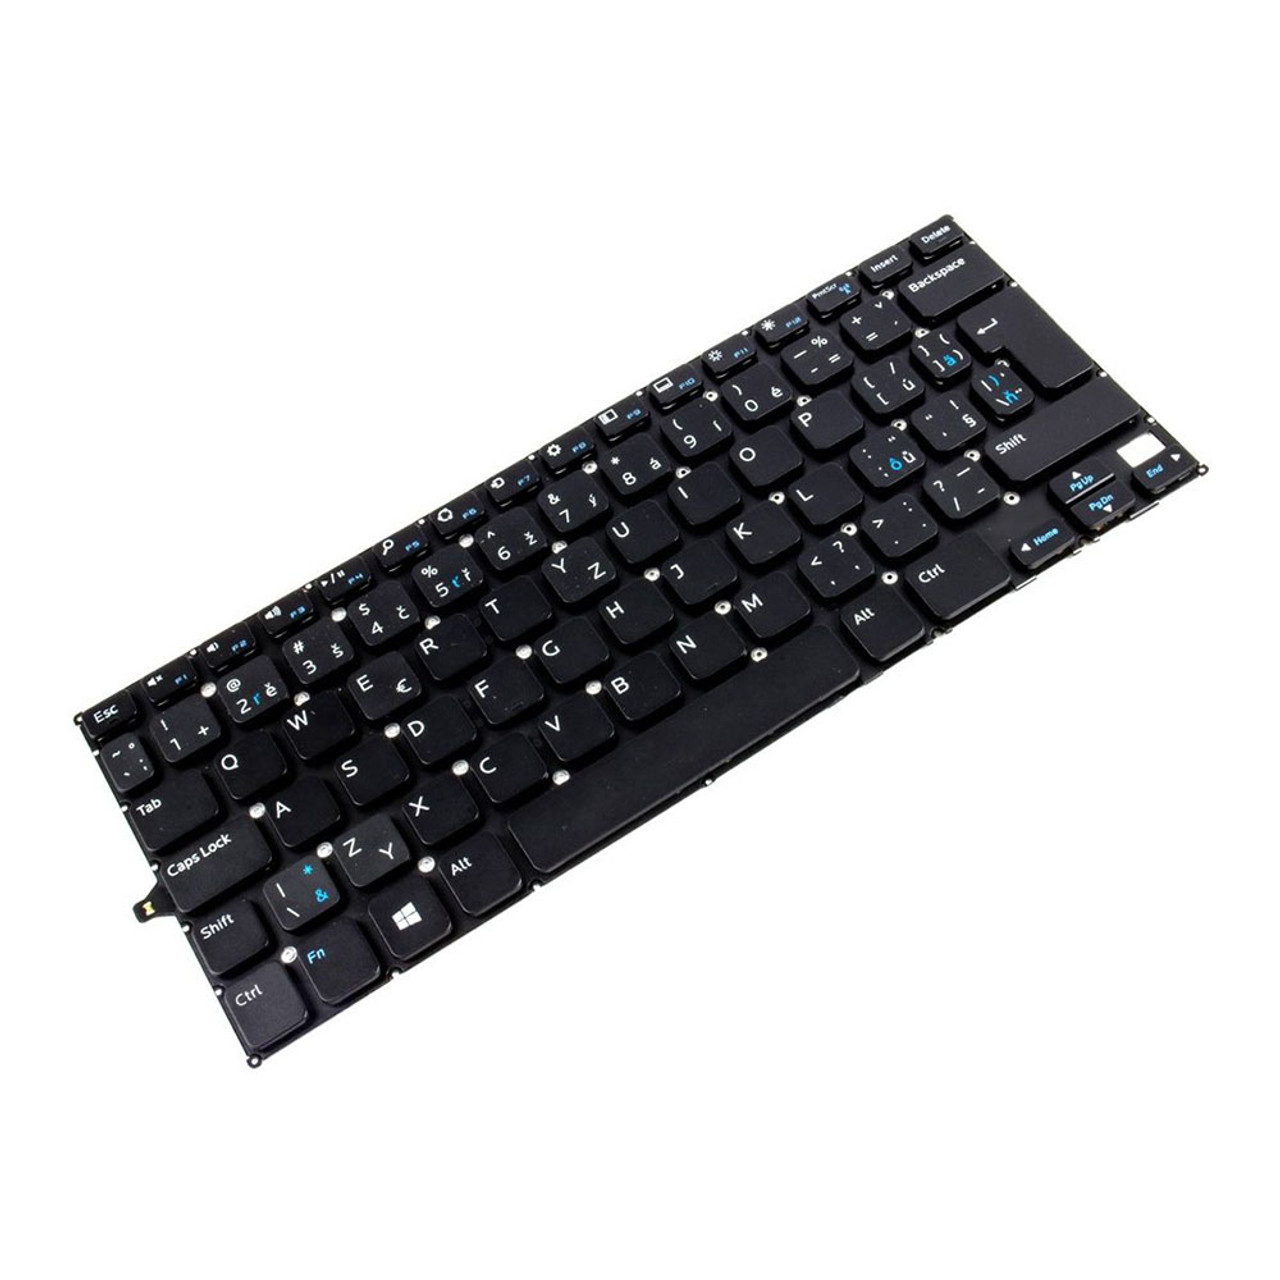 Laptop Keyboard For DELL Inspiron 11 3147 3148 3152 3153 3157 3158